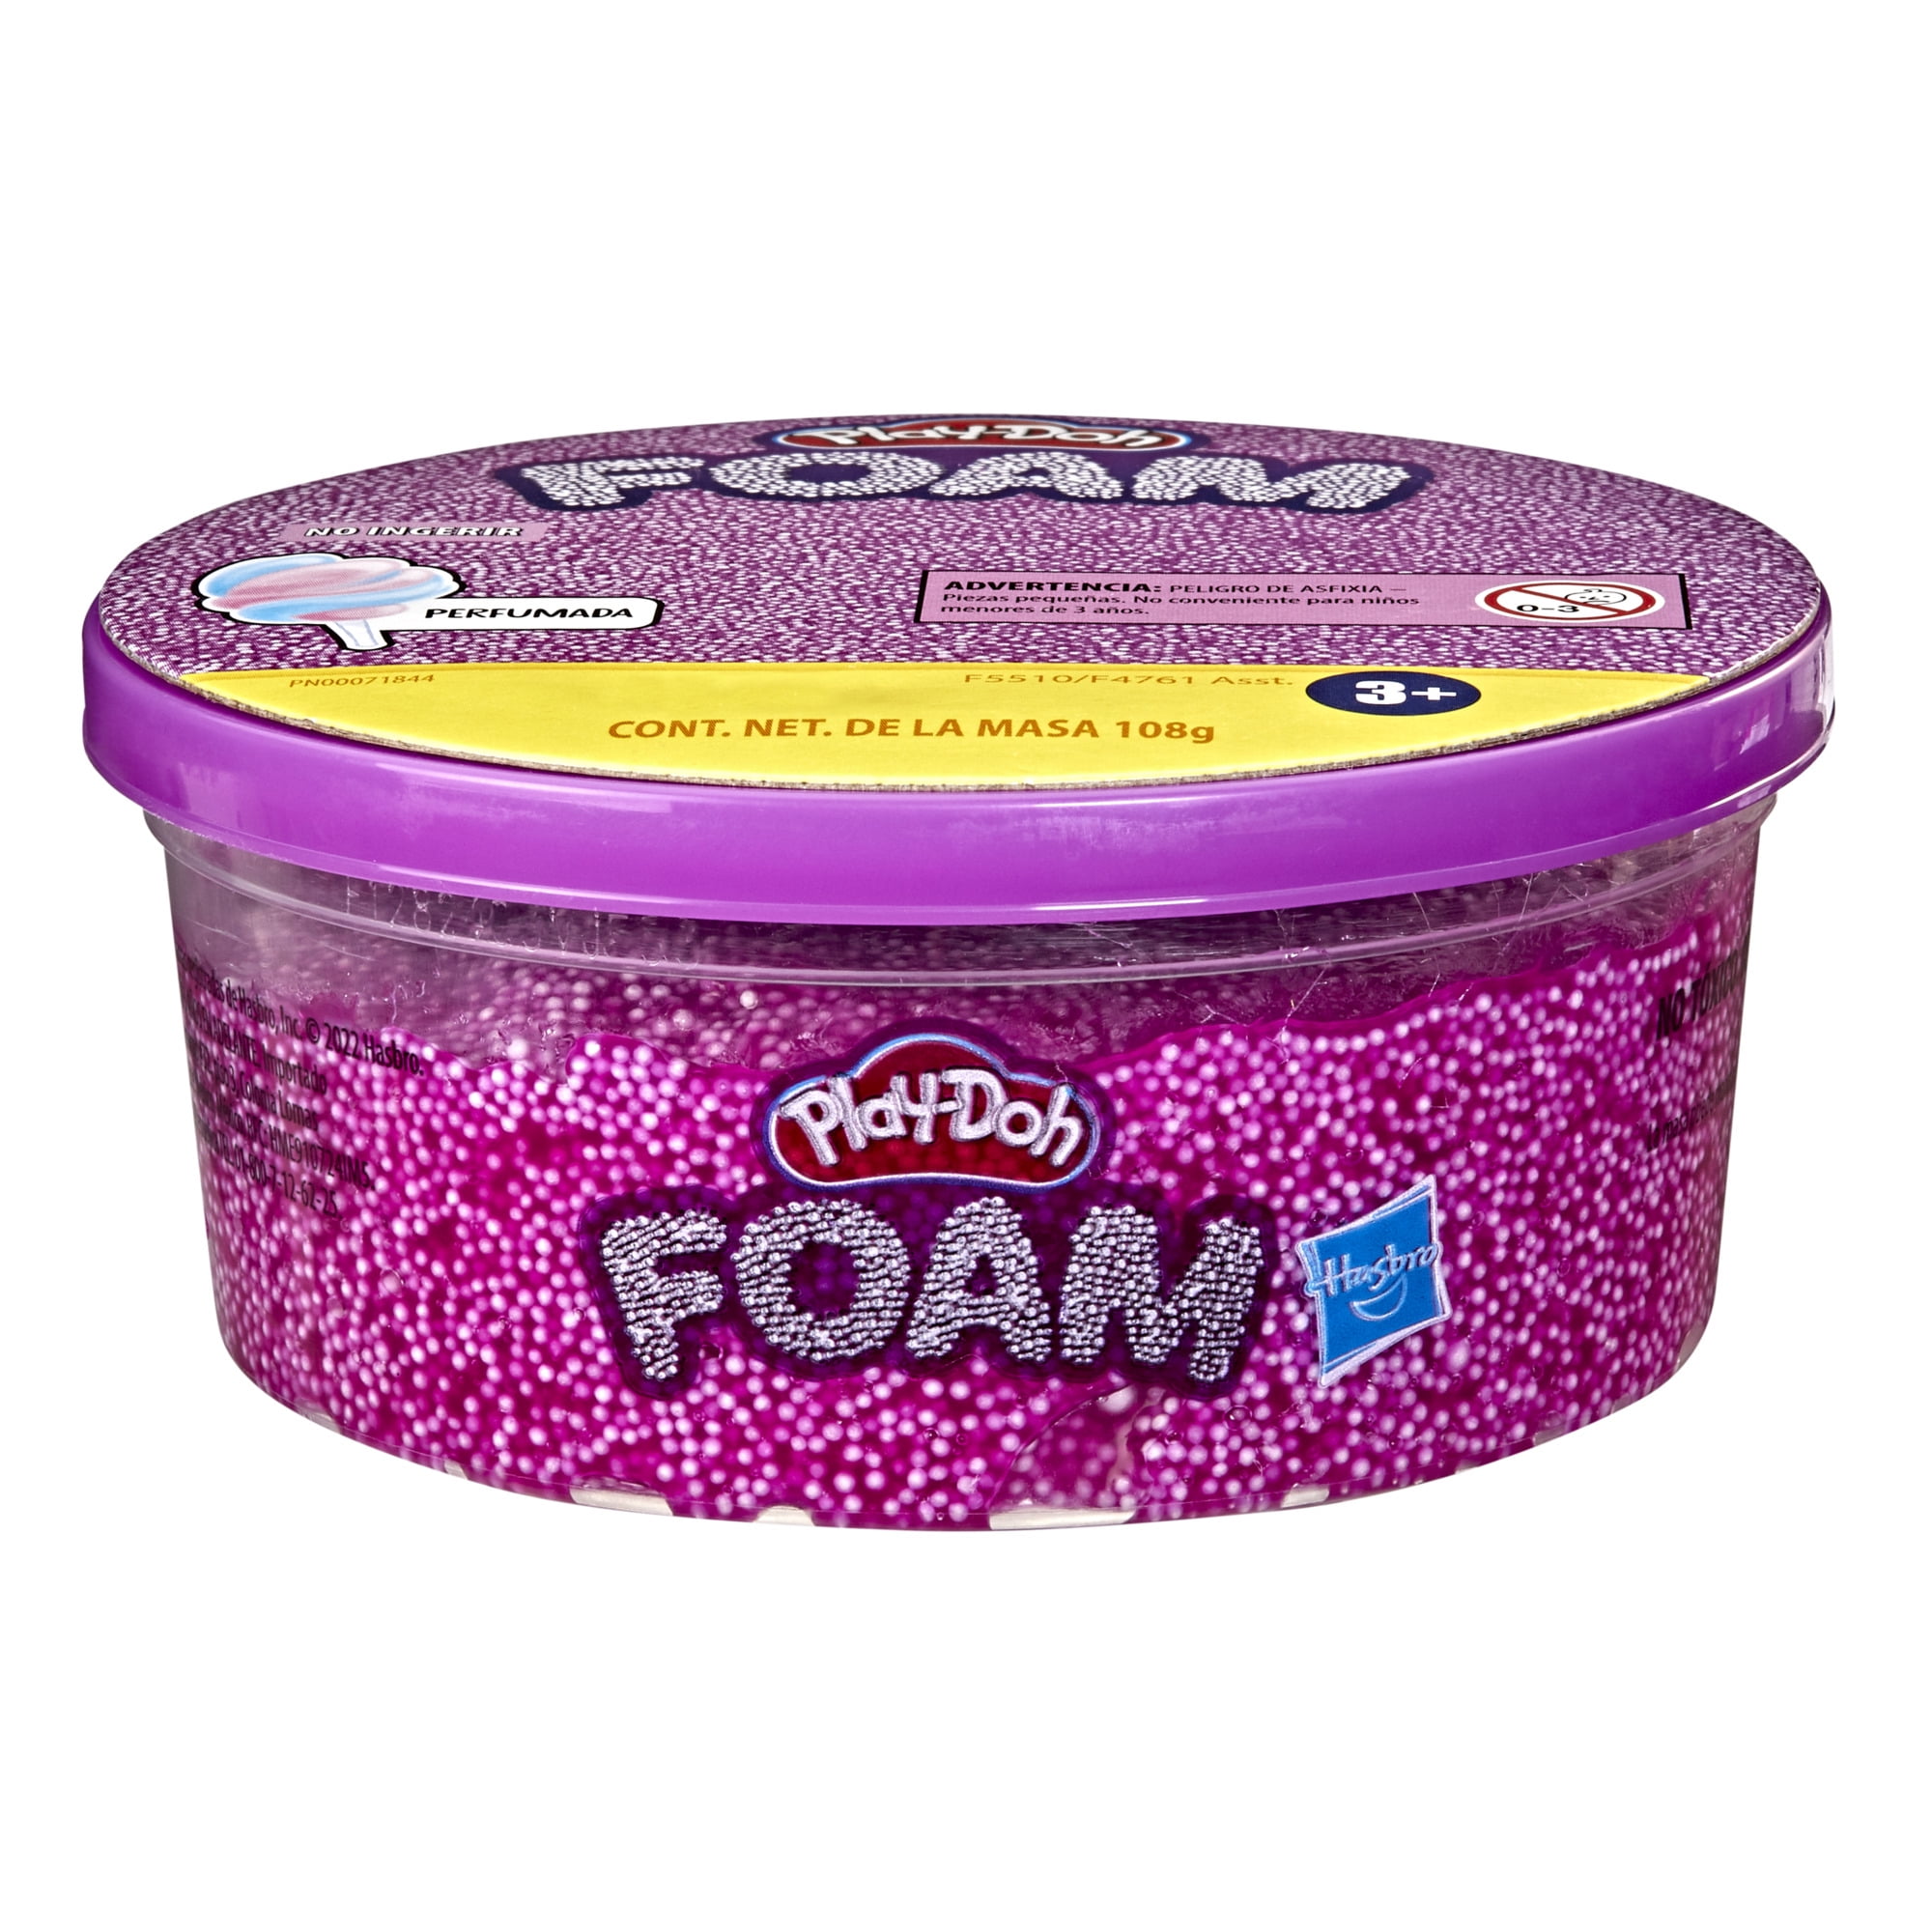 Play-Doh Foam Purple Cotton Candy Scented Single Can, 3.8 Ounces